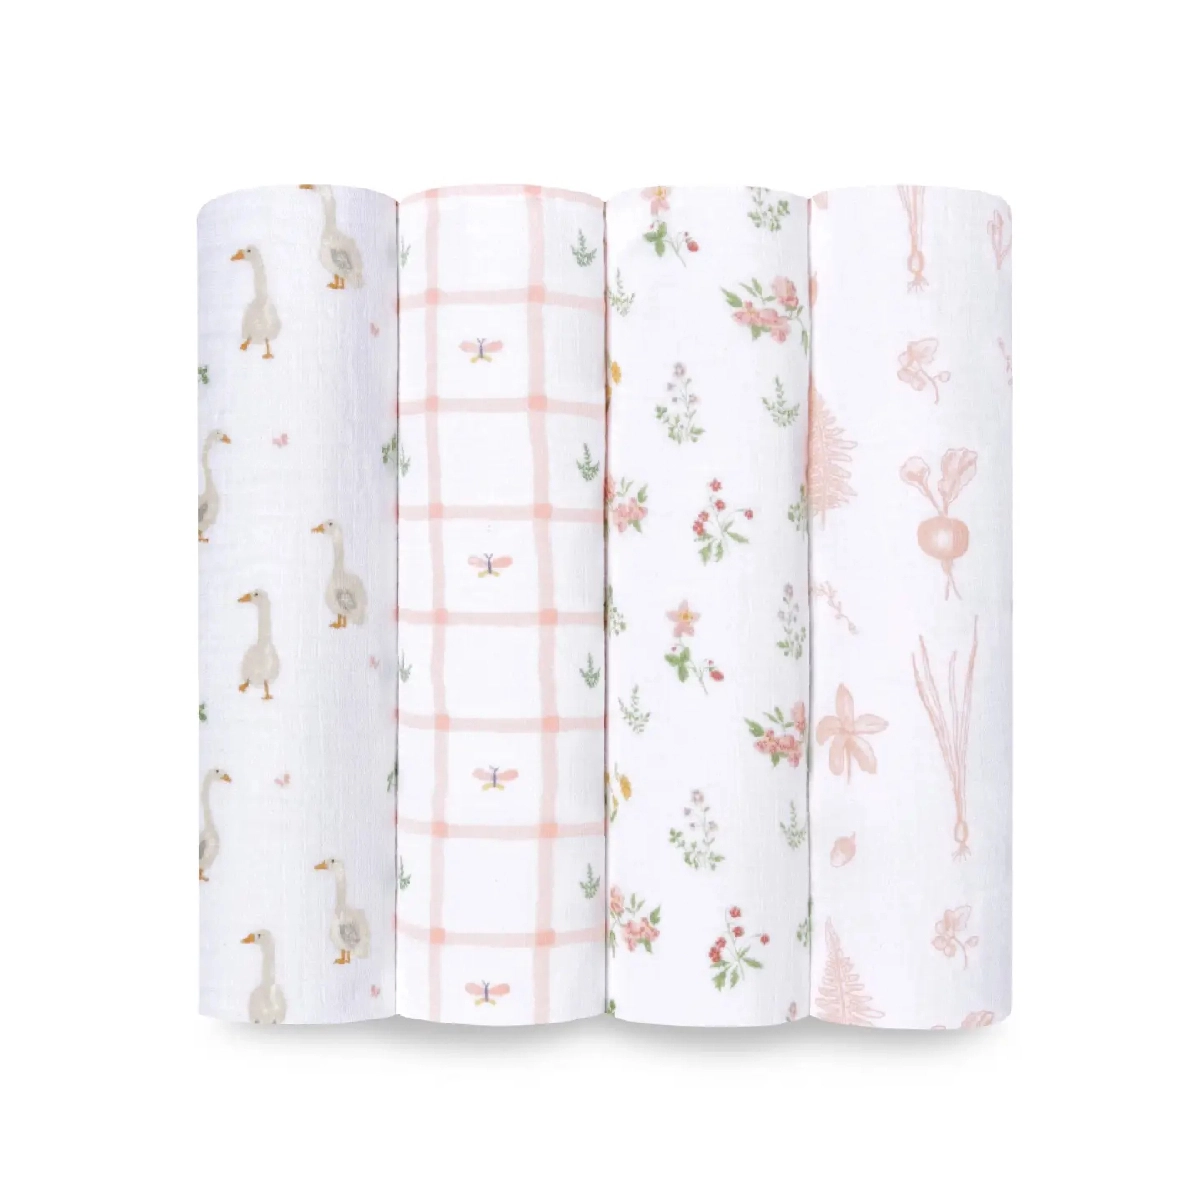 Image of Aden + Anais Pack of 4 Essentials Cotton Muslin Swaddle Blanket - Country Floral (23-19-253)